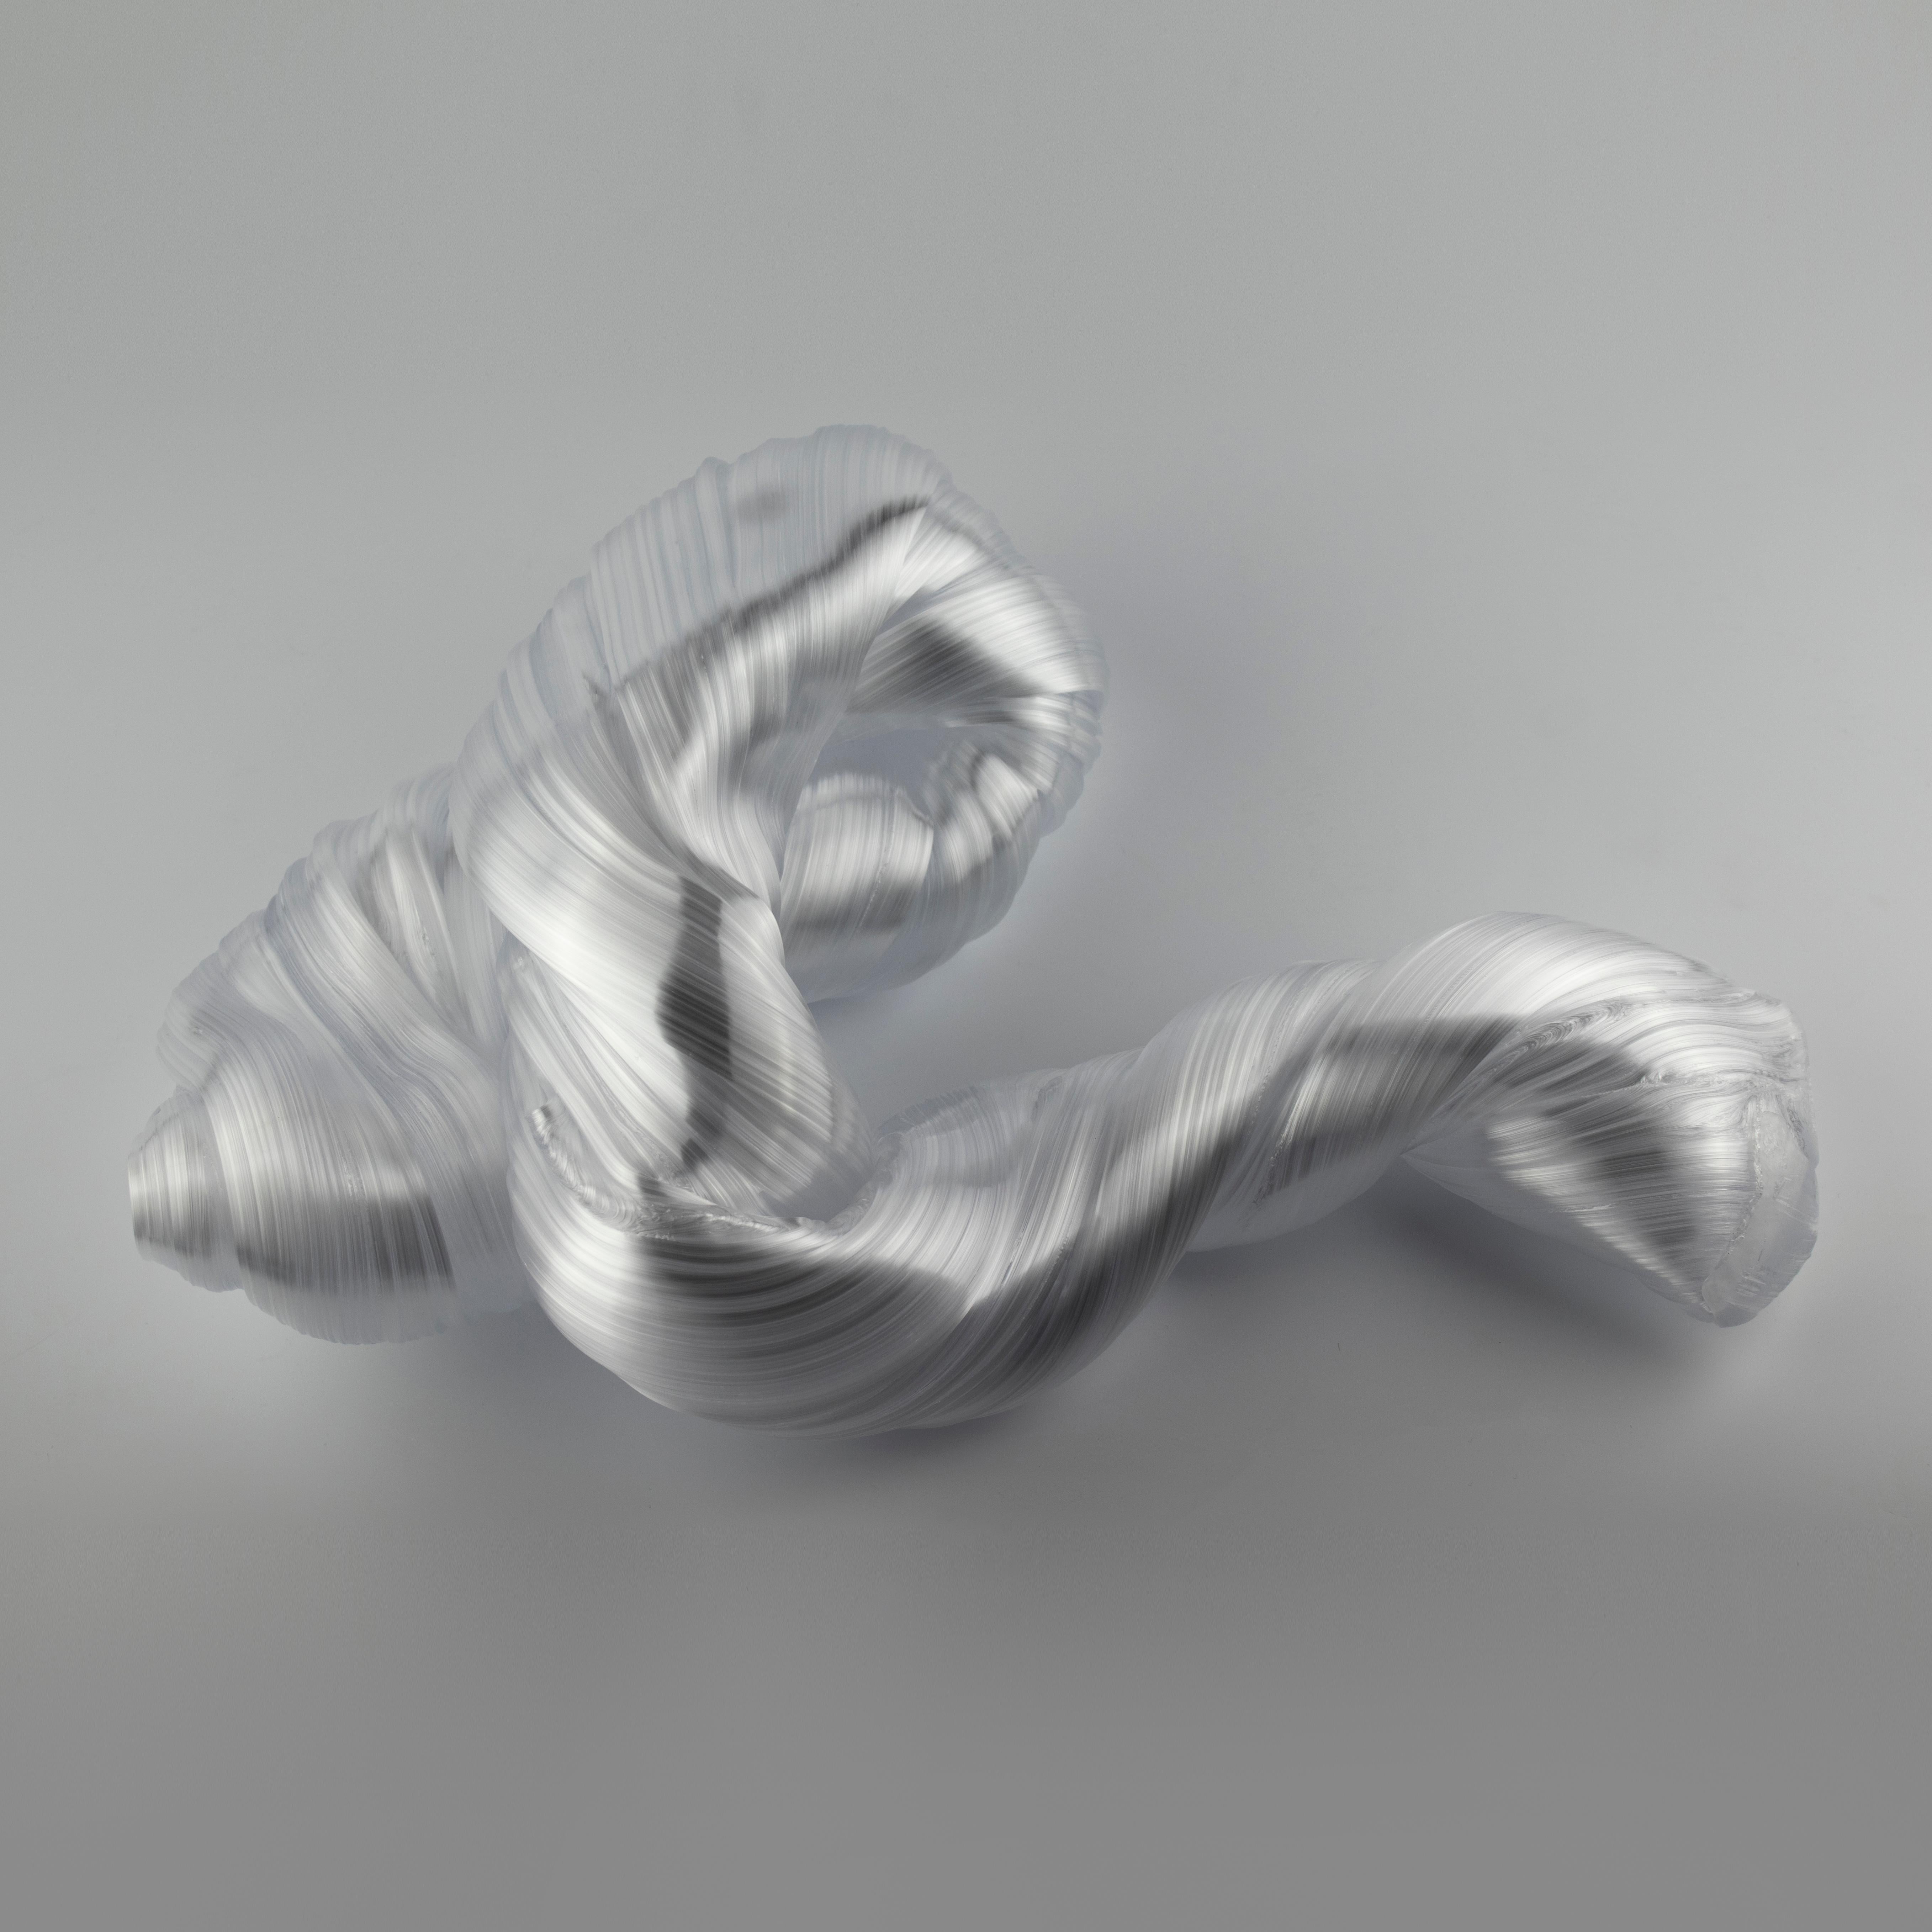 Contemporary Folded Rock in White, a Unique White Glass Sculpture by Maria Bang Espersen